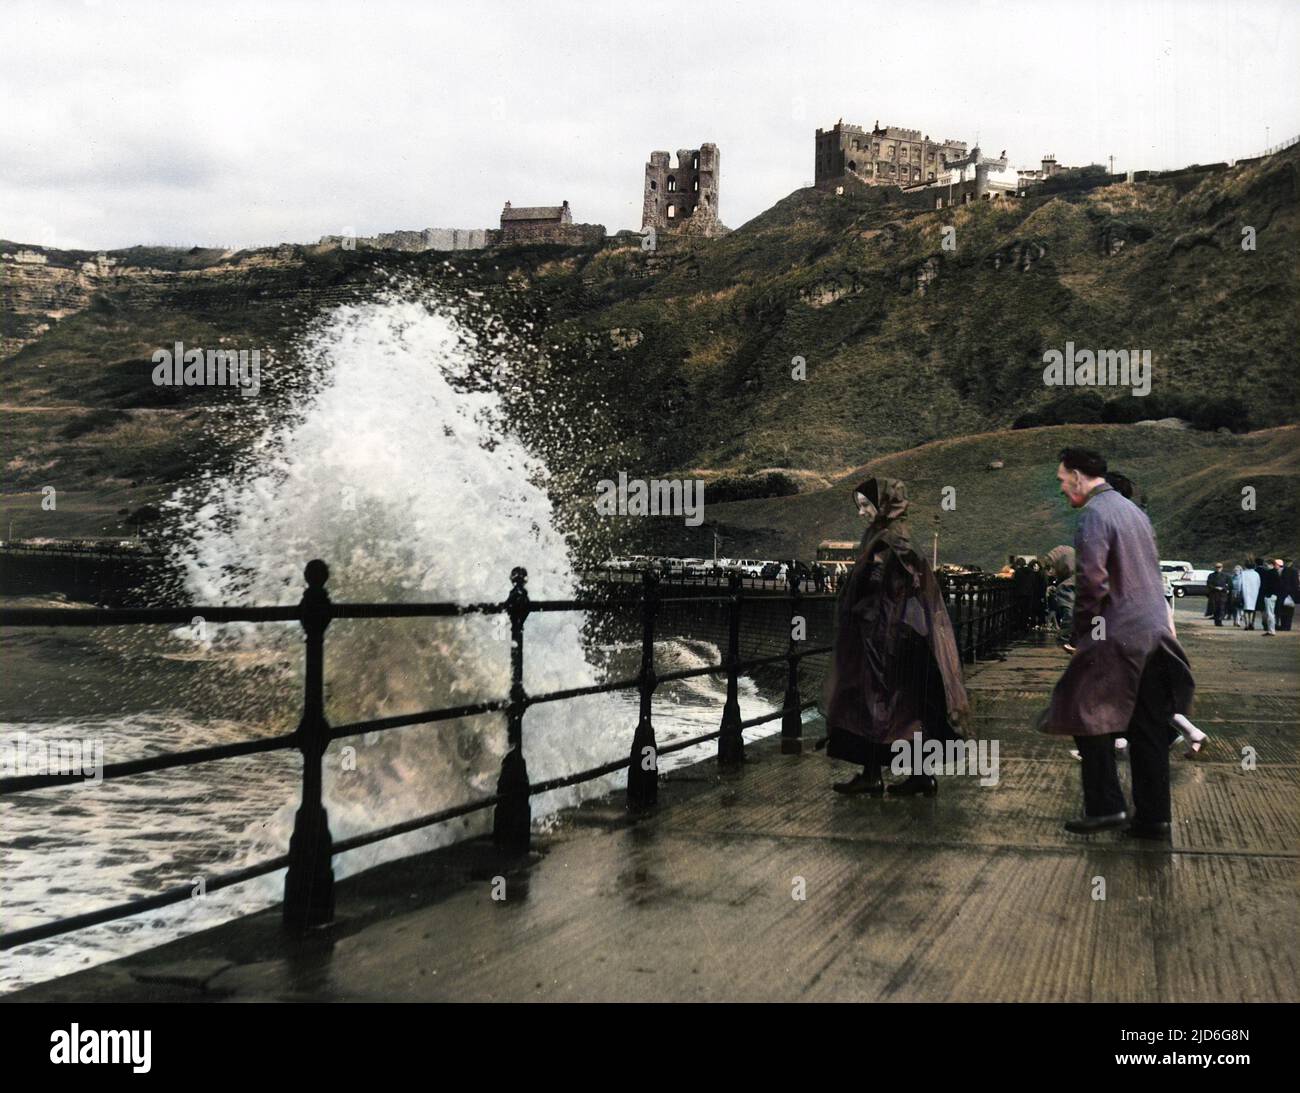 Rough sea and waves lashing the Yorkshire coastline at Scarborough, England, much to the delight of wet holidaymakers! Colourised version of : 10171840       Date: 1950s Stock Photo